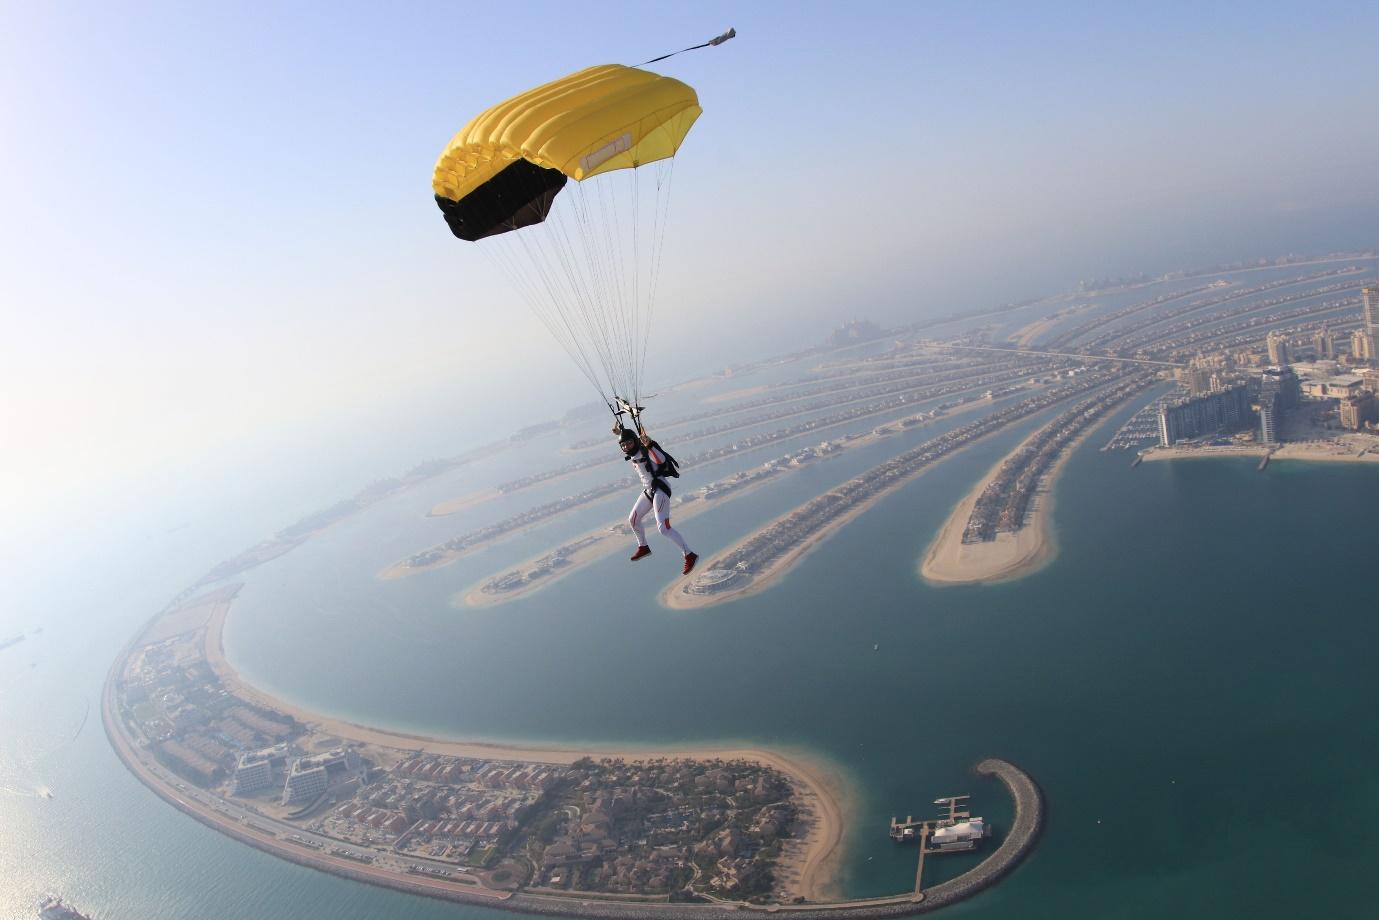 A person skydiving with a yellow parachute

Description automatically generated